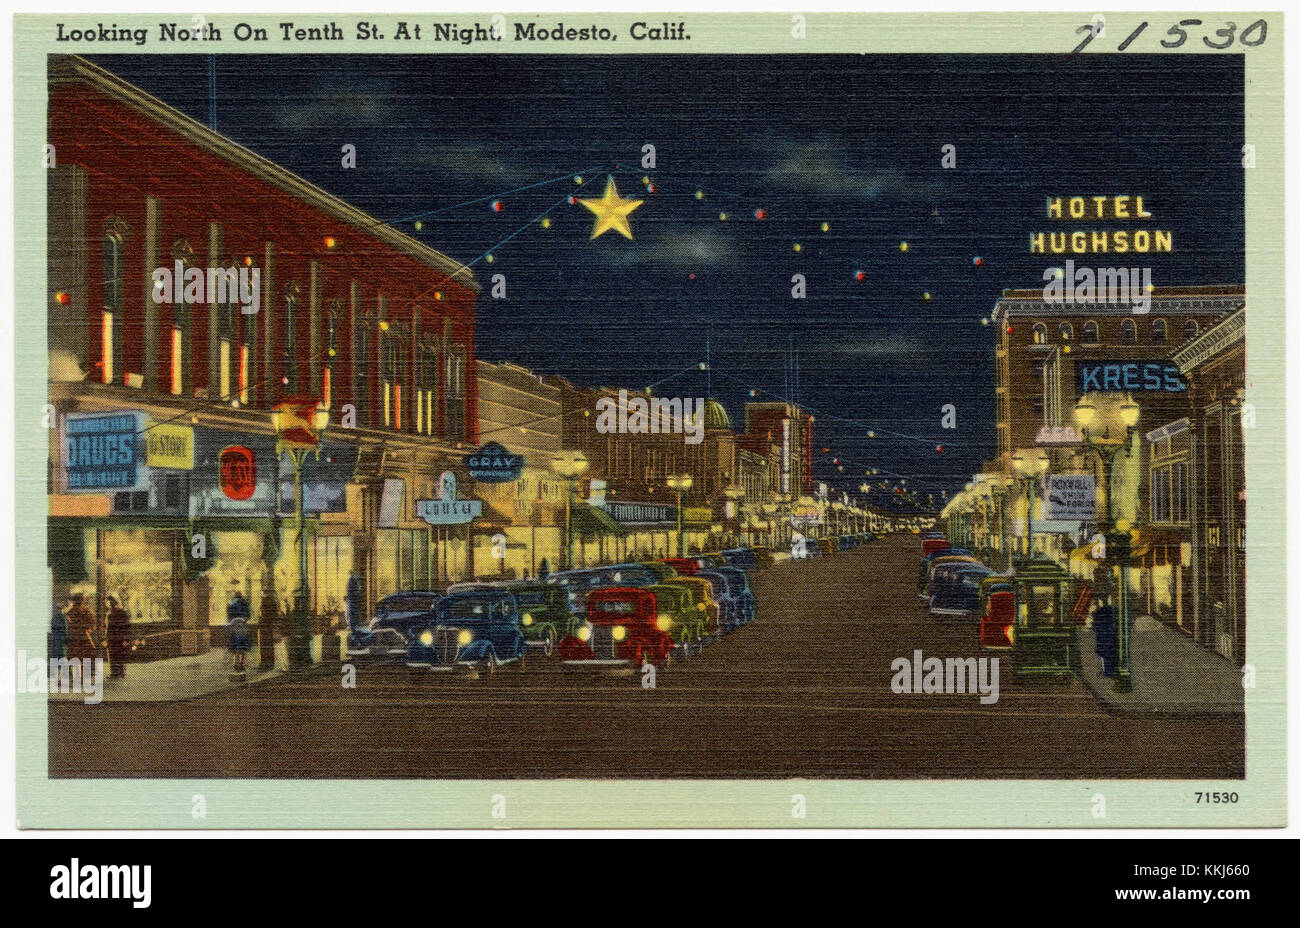 Looking North On Tenth St. At Night, Modesto, Calif (71530) Stock Photo